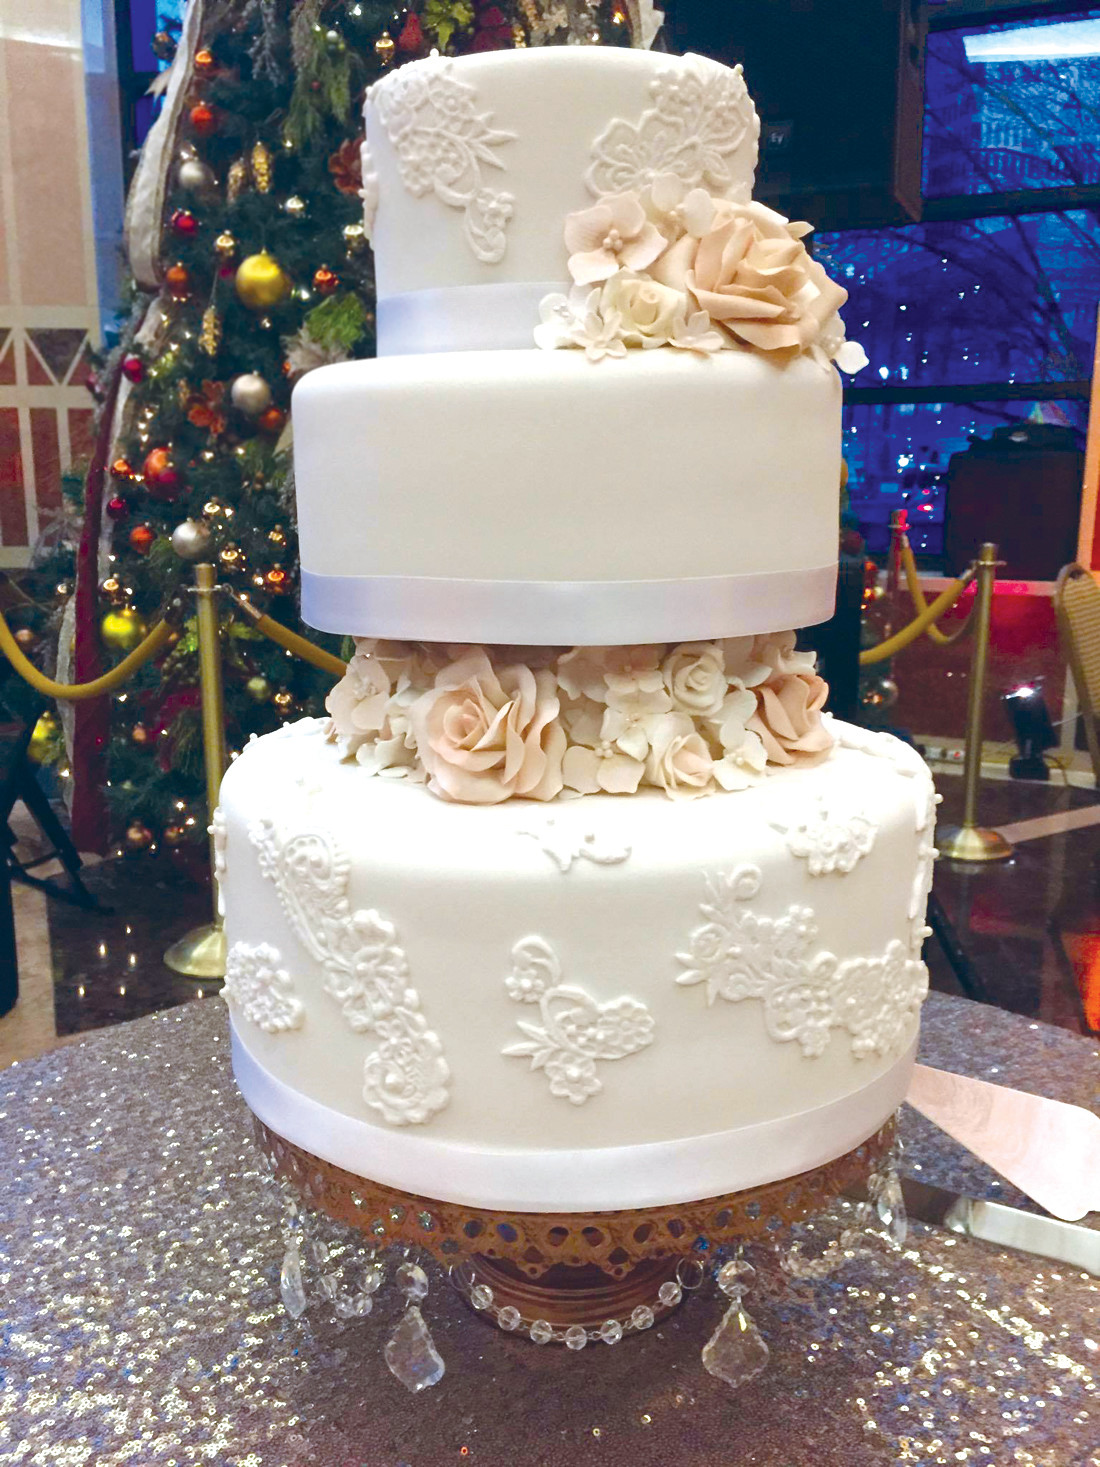 SIMPLE ELEGANCE: Rachel Marchetti of Rachel’s Sugar Shop created a cake that coordinated with the bride’s gown.